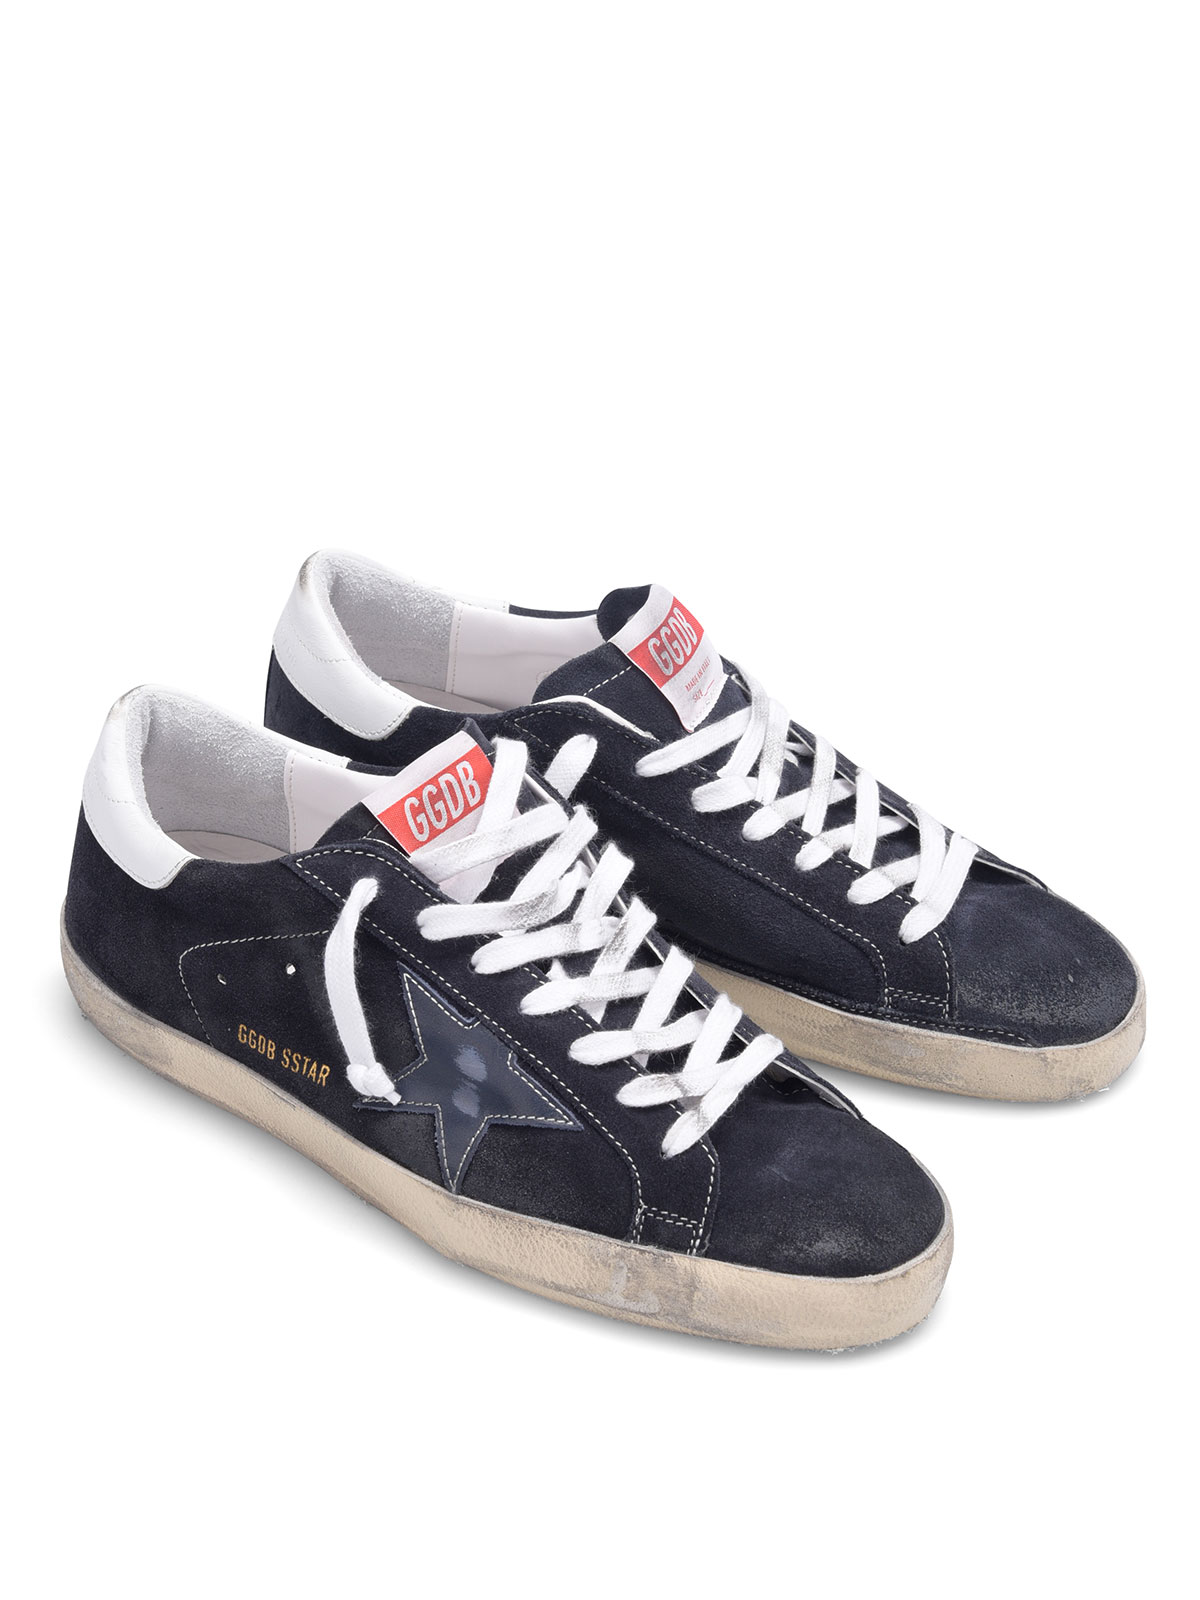 Ggdb Star Shoes / Golden Goose Sneakers Outlet, GGDB Superstar Leather ...